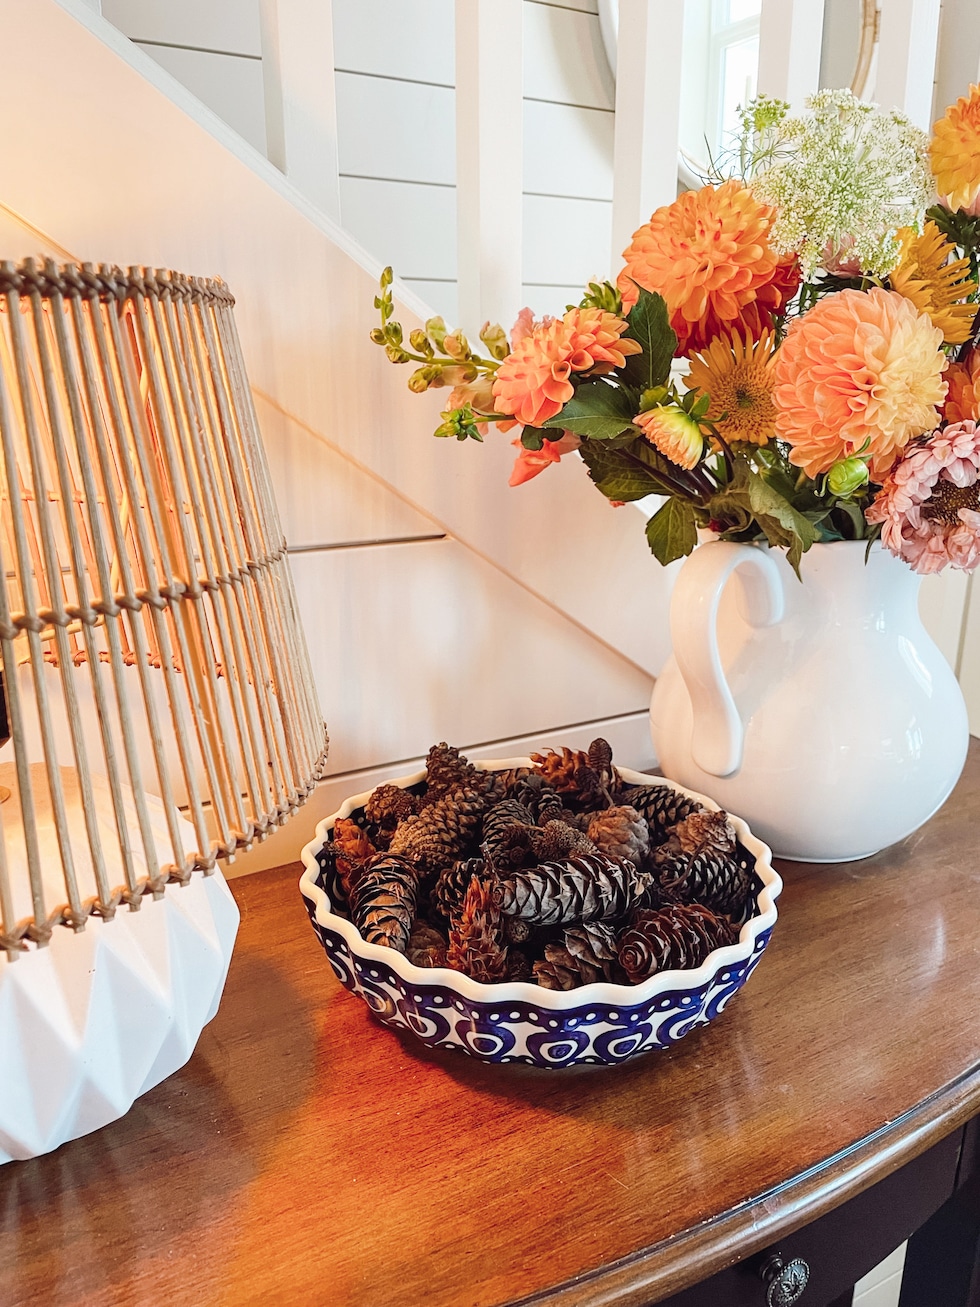 DIY Scented Pinecones for a Cozy Fall Home